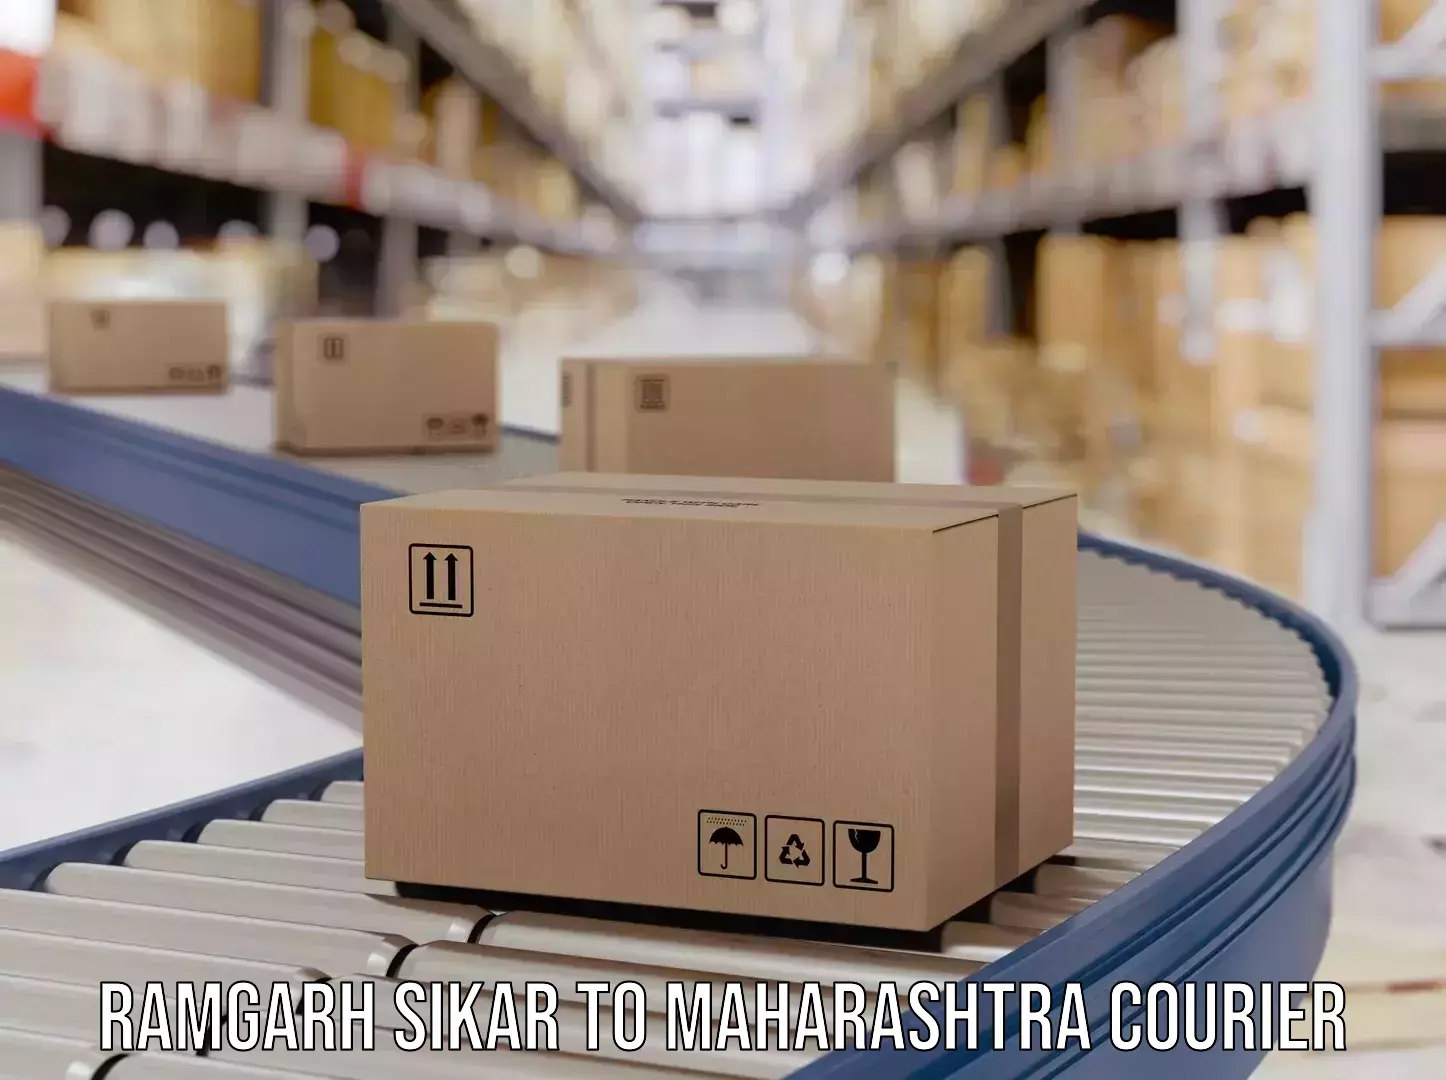 Next-generation courier services Ramgarh Sikar to Vasmat